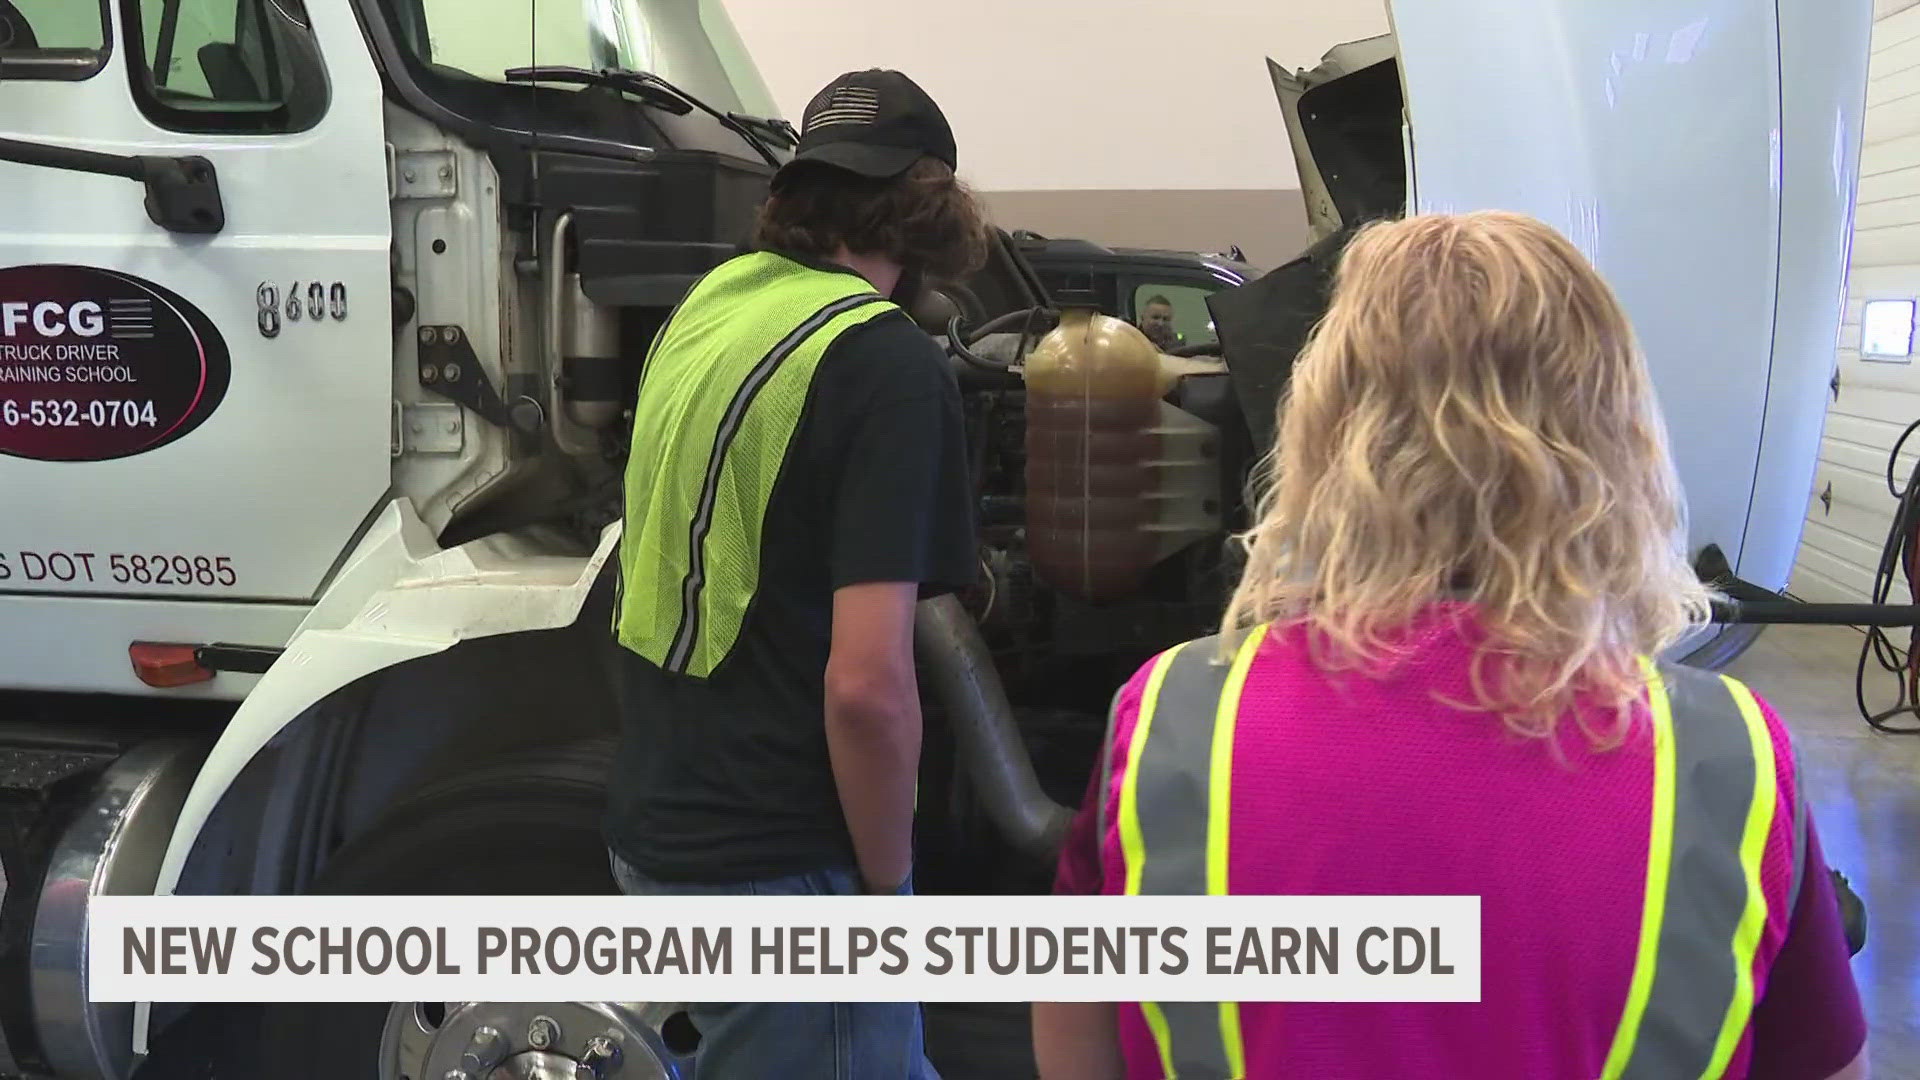 Hamilton Community Schools created the program to help their students explore different career opportunities.